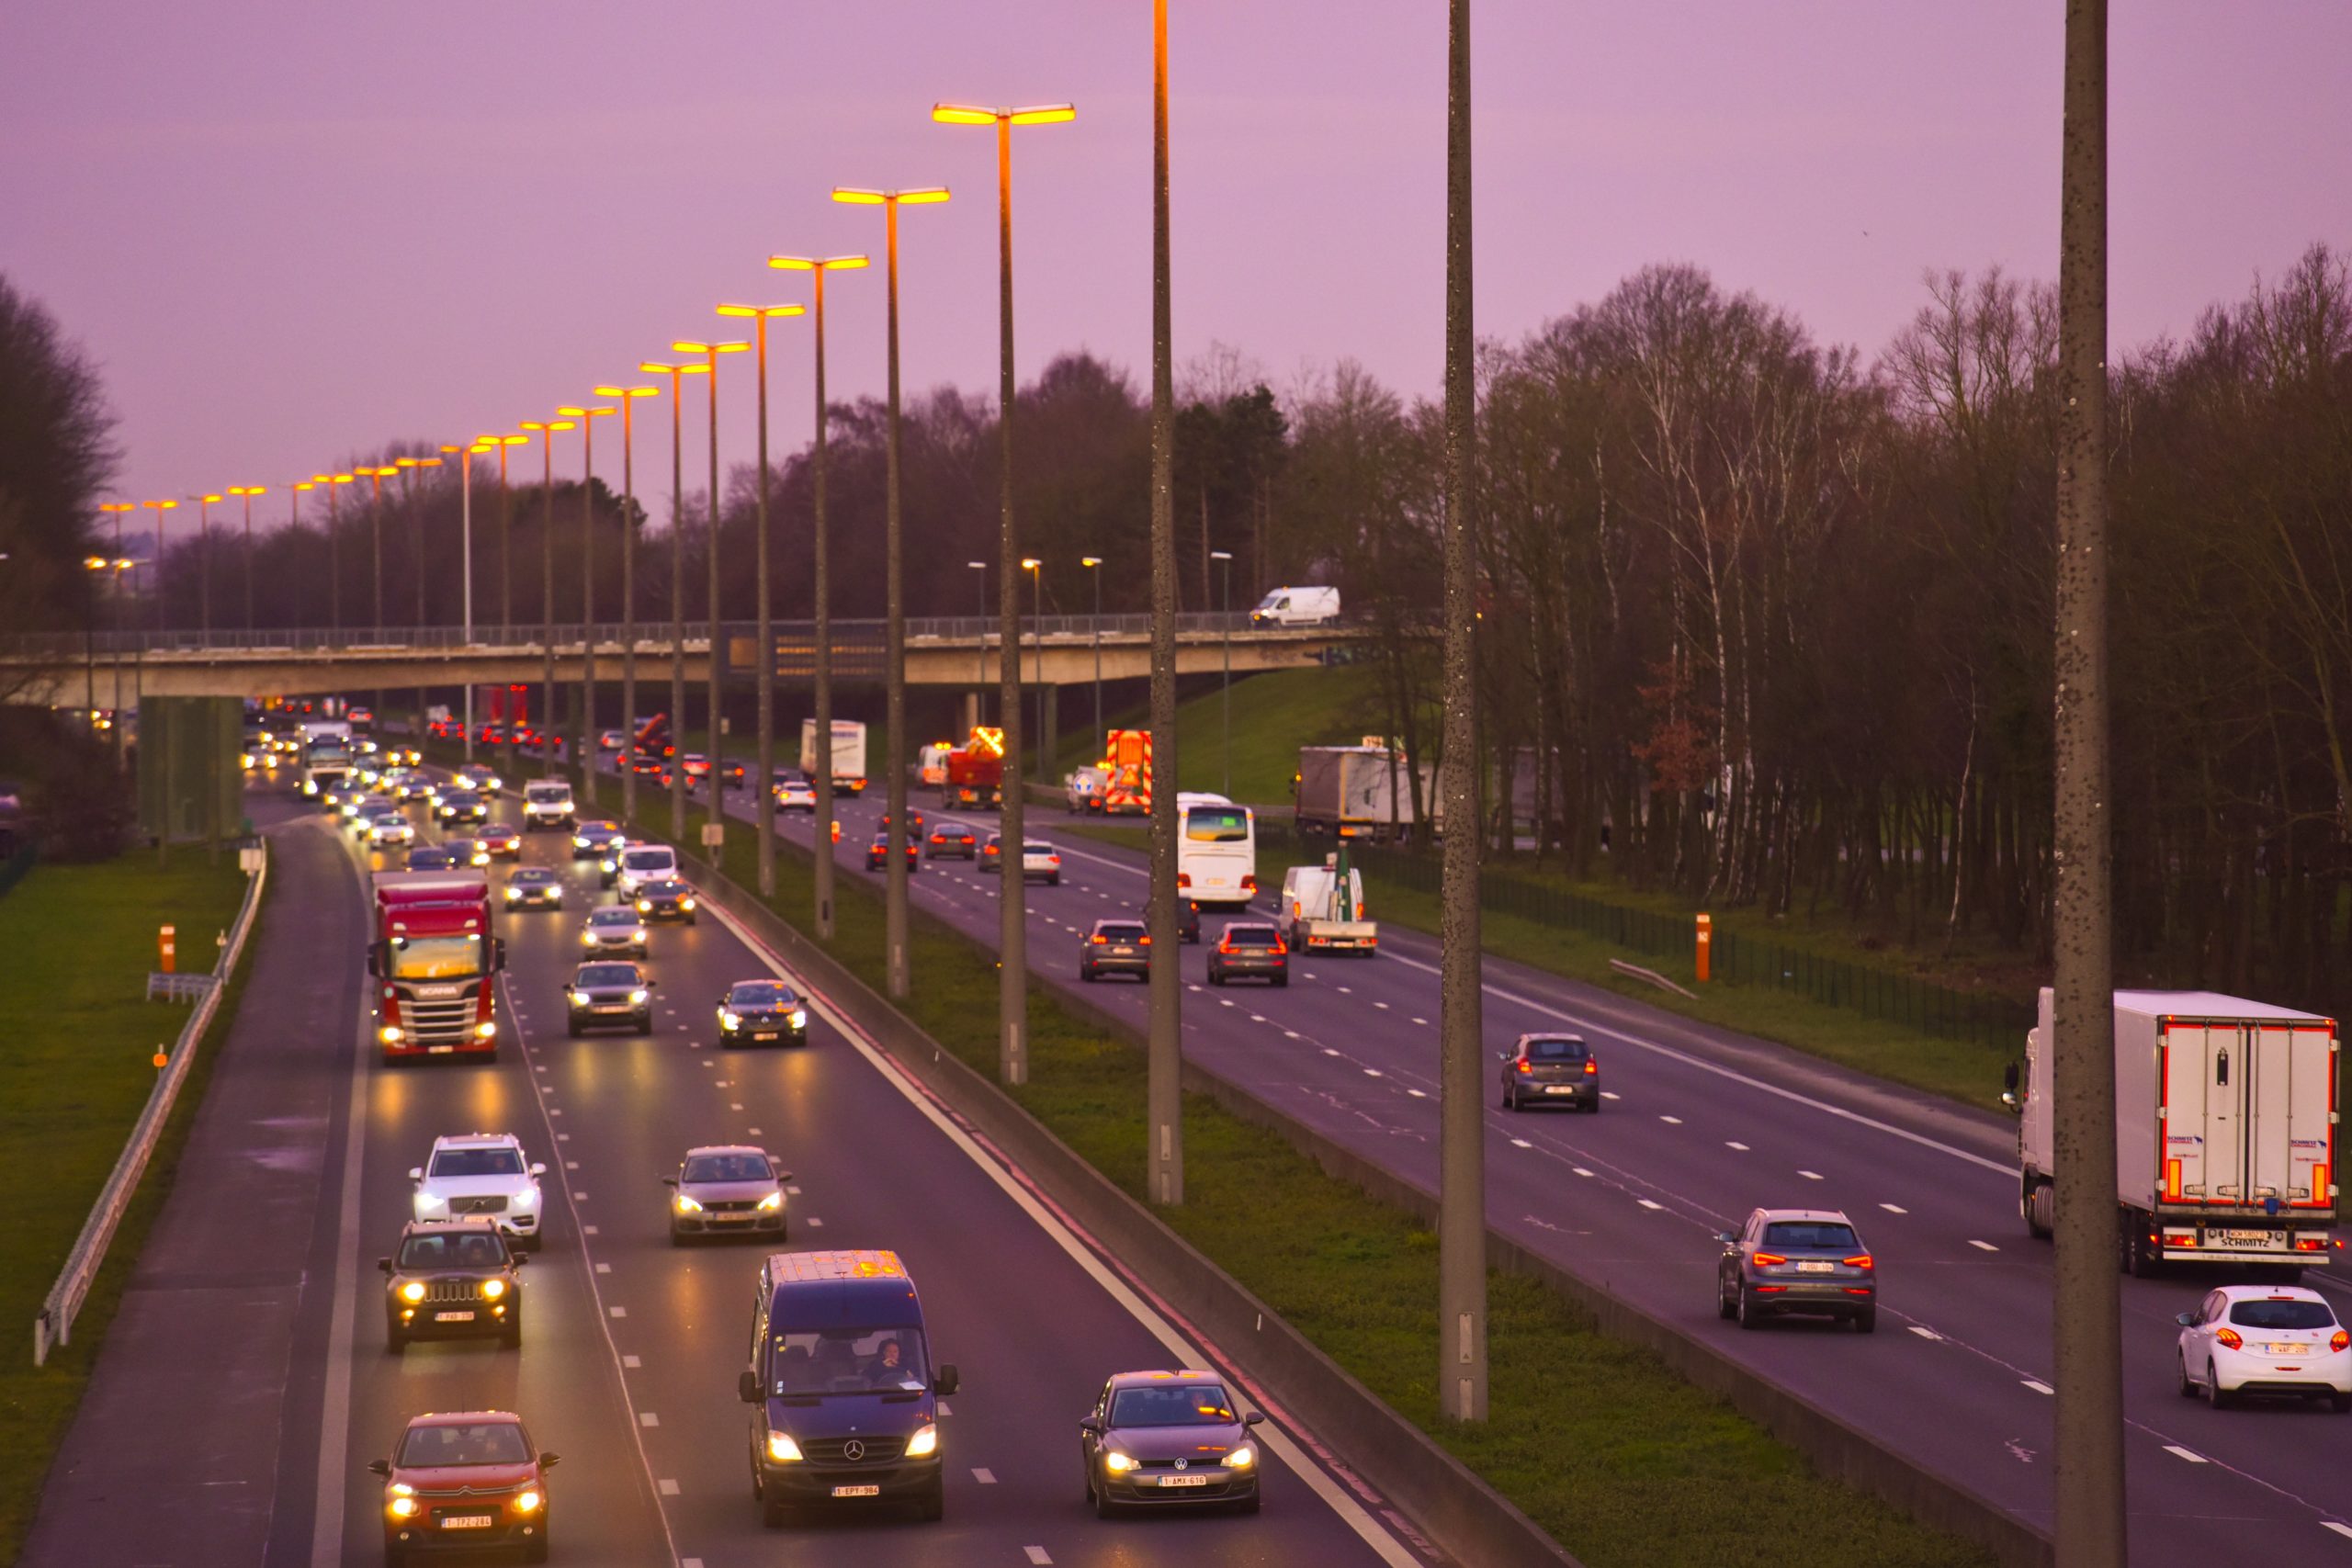 Wallonia’s smart highway lights flash to warn for ghost-drivers